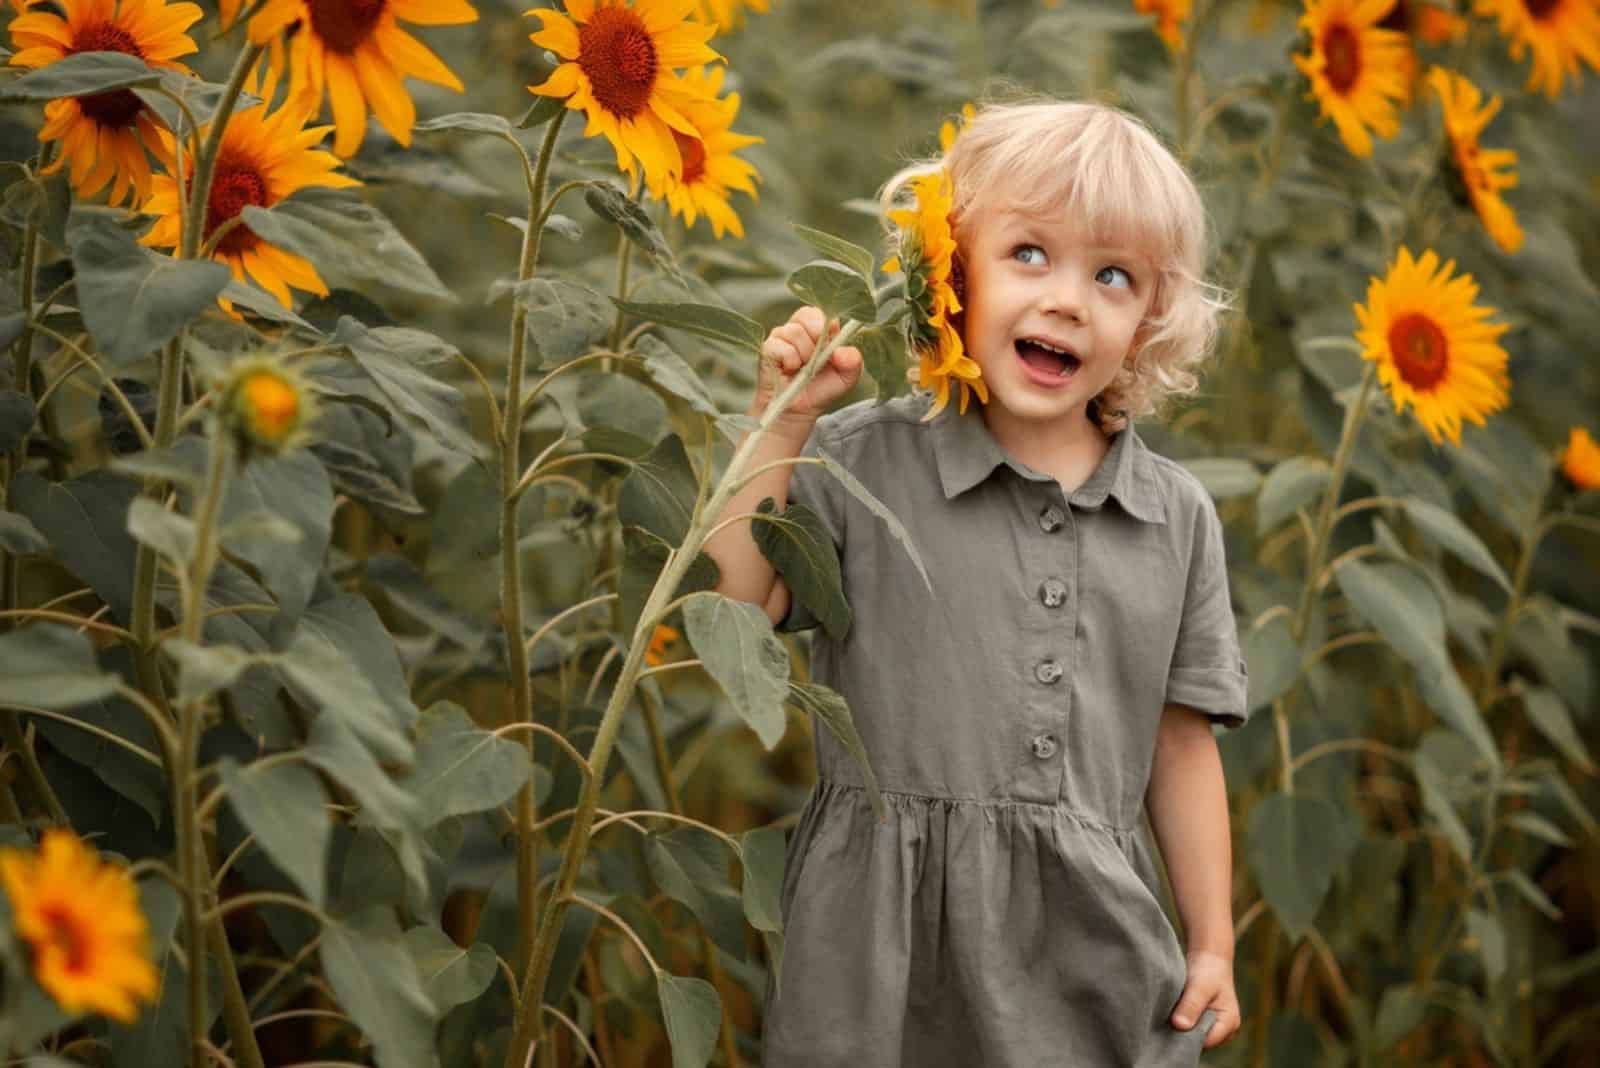 Cute little girl holds sunflower in hand and smiles